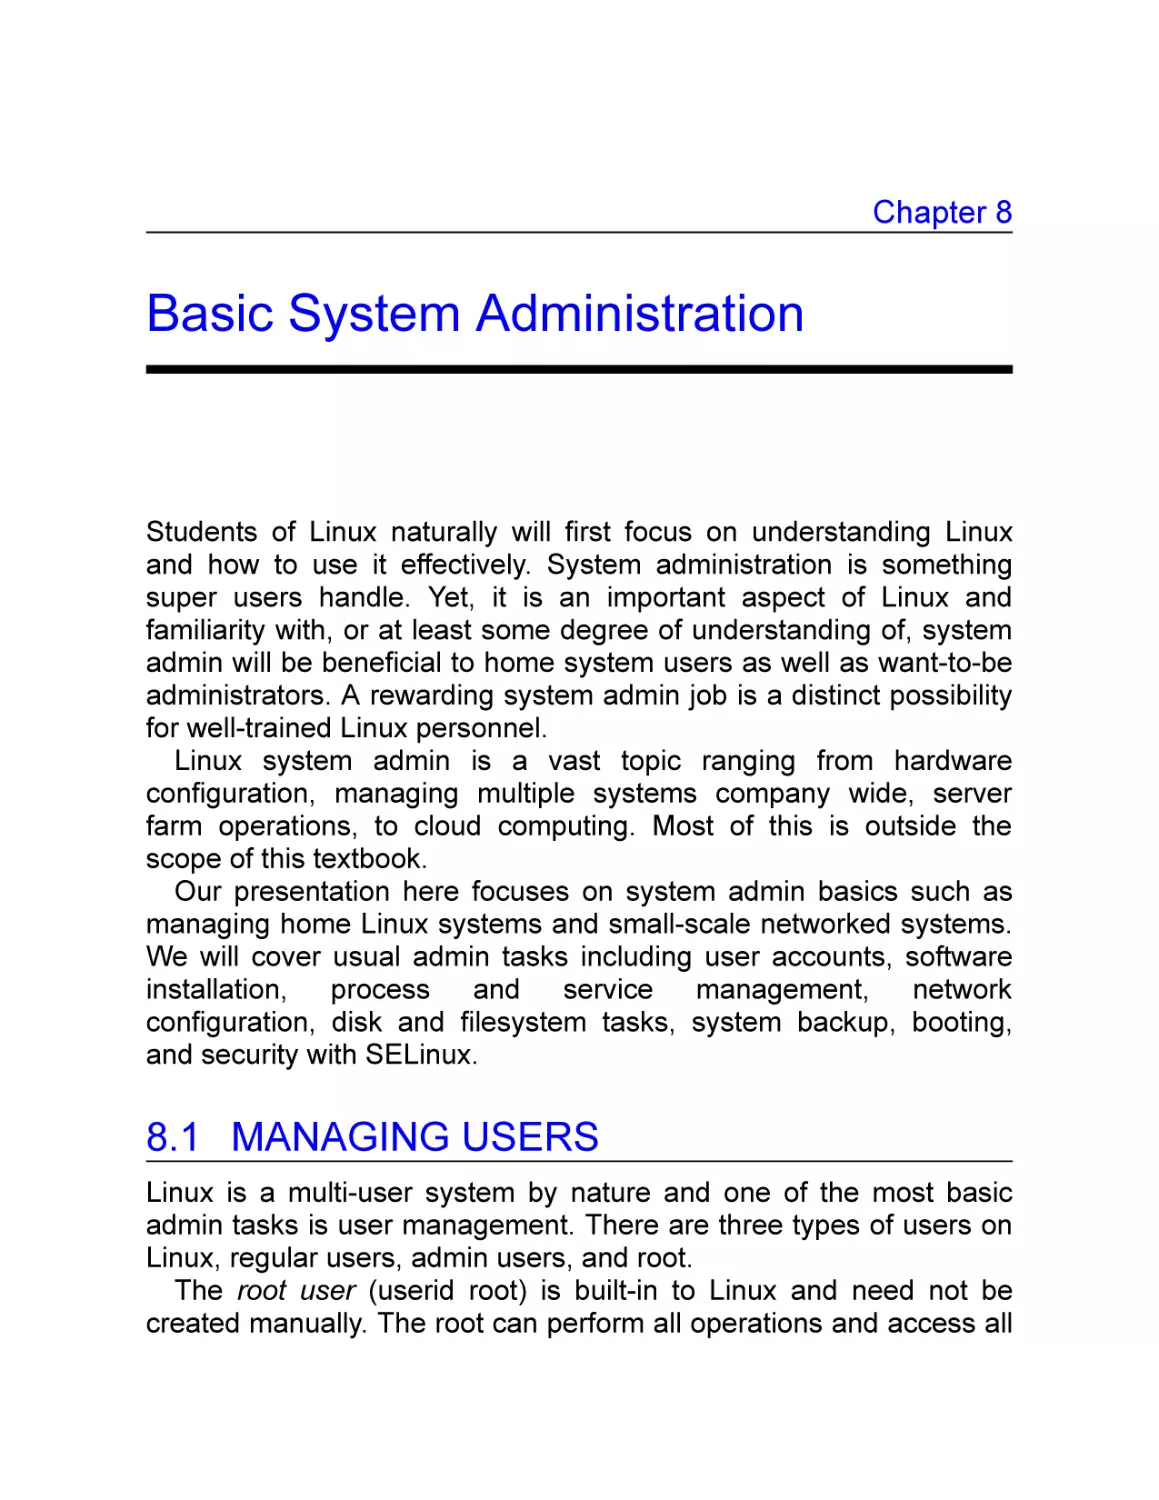 8 Basic System Administration
8.1 Managing Users